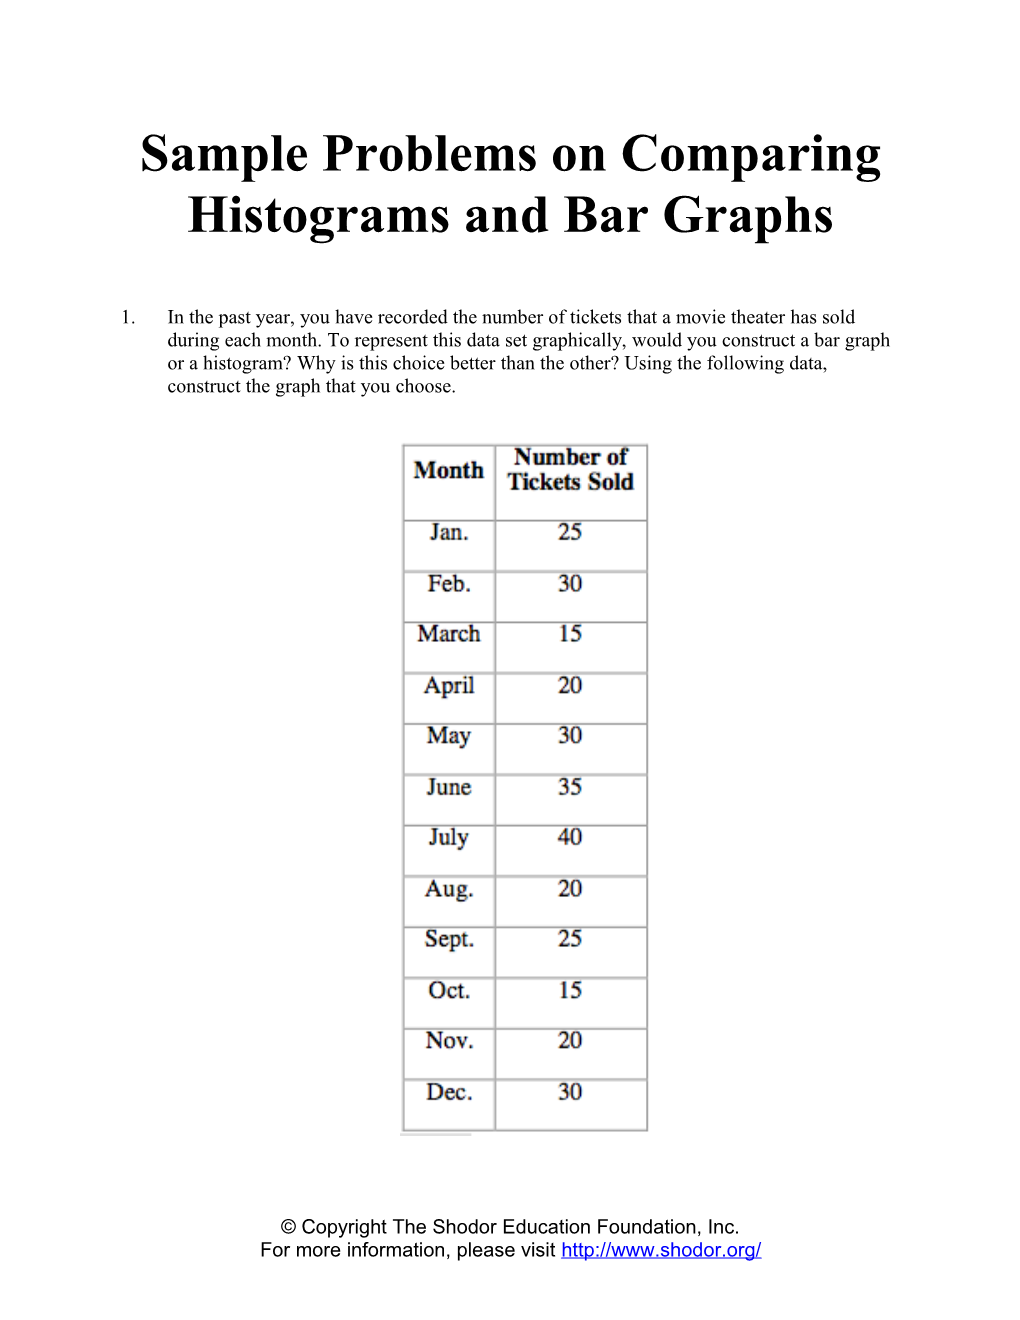 Sample Problems on Comparing Histograms and Bar Graphs